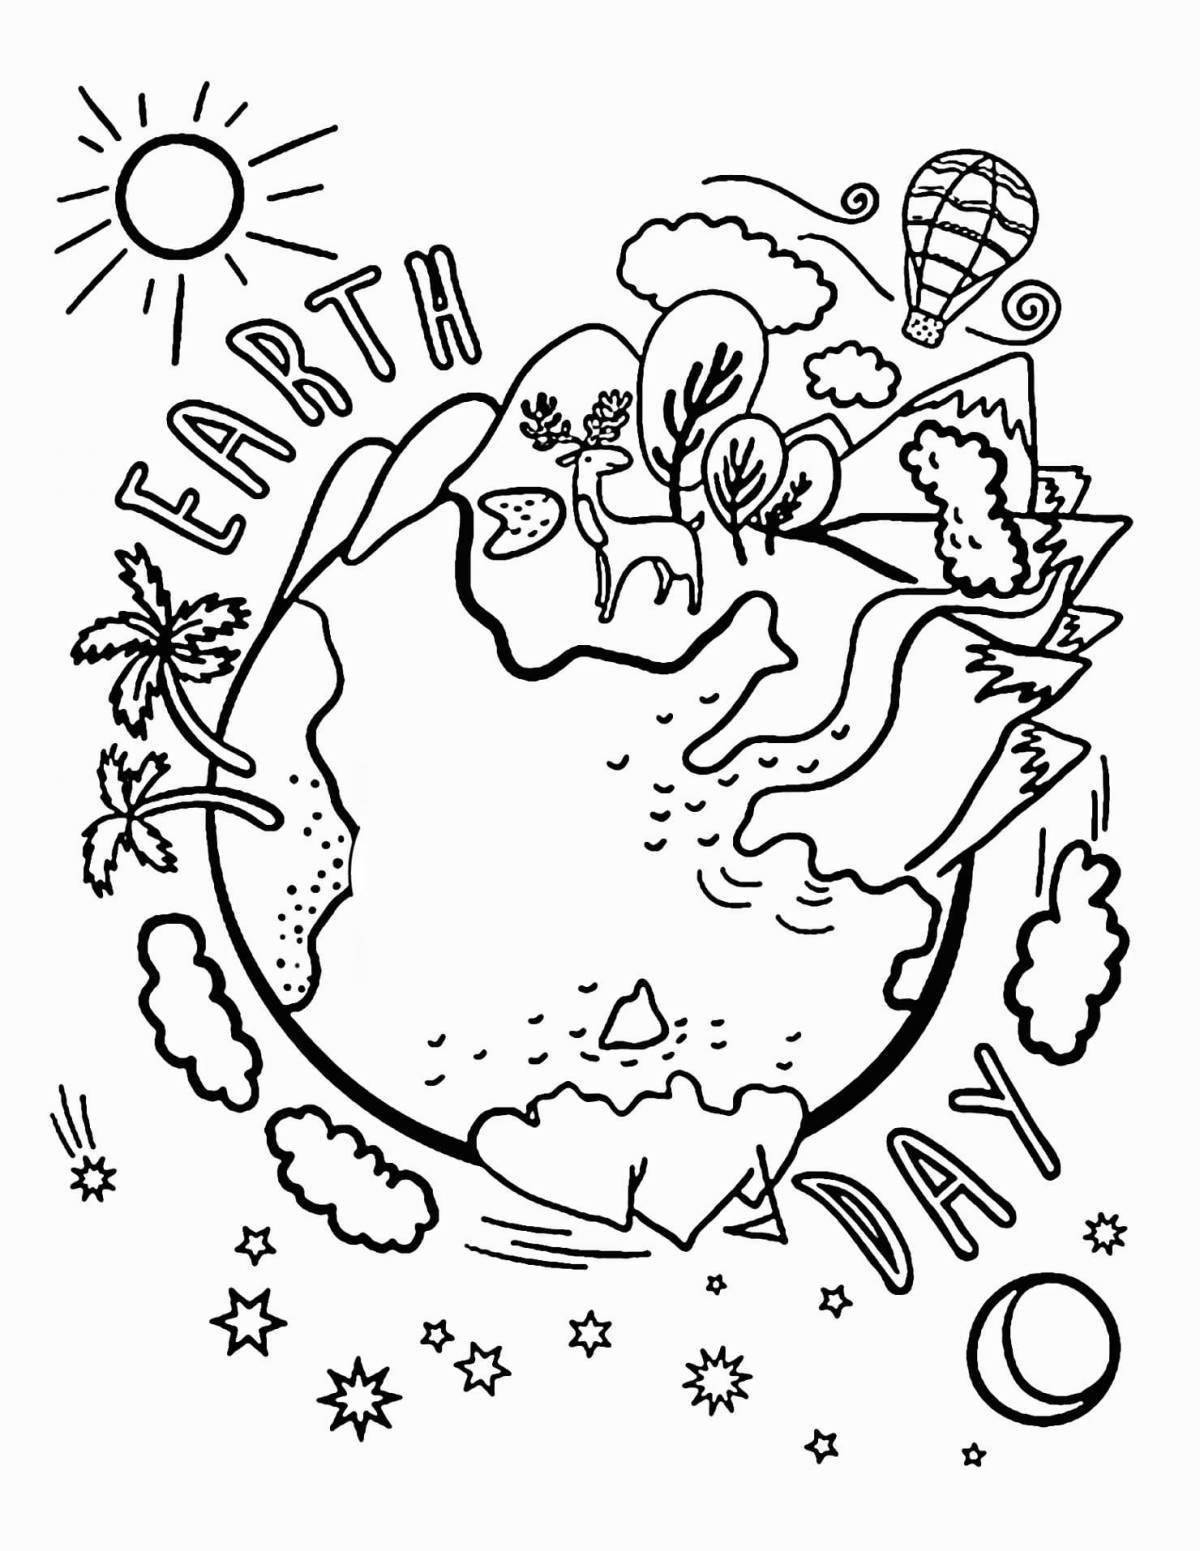 Whimsical world coloring book